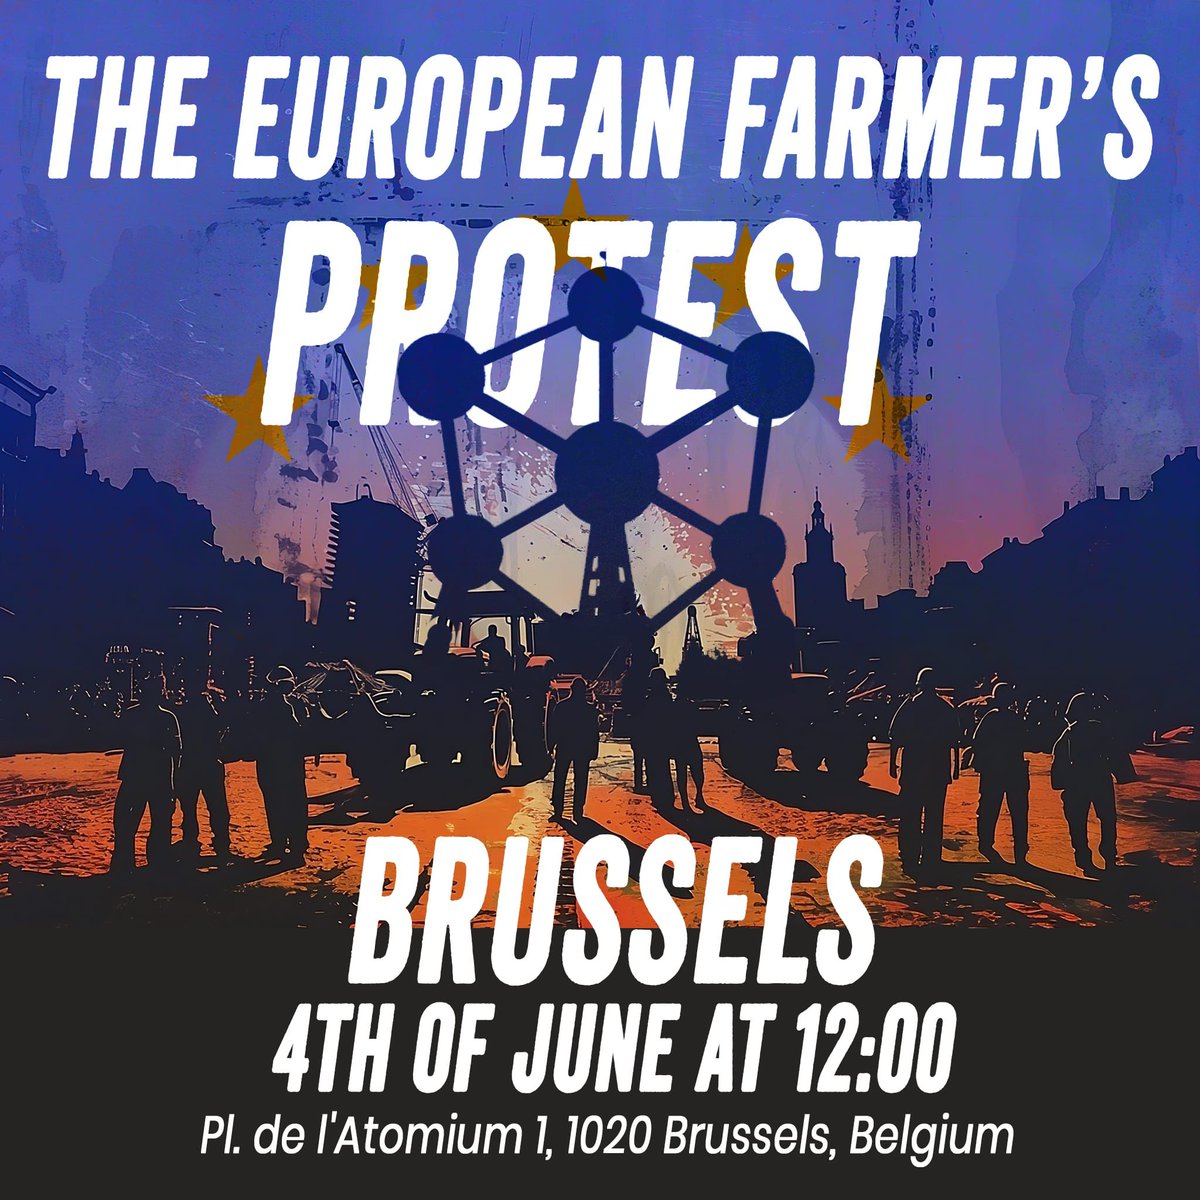 Be there 4 Jun #FarmersProtest #Brussels